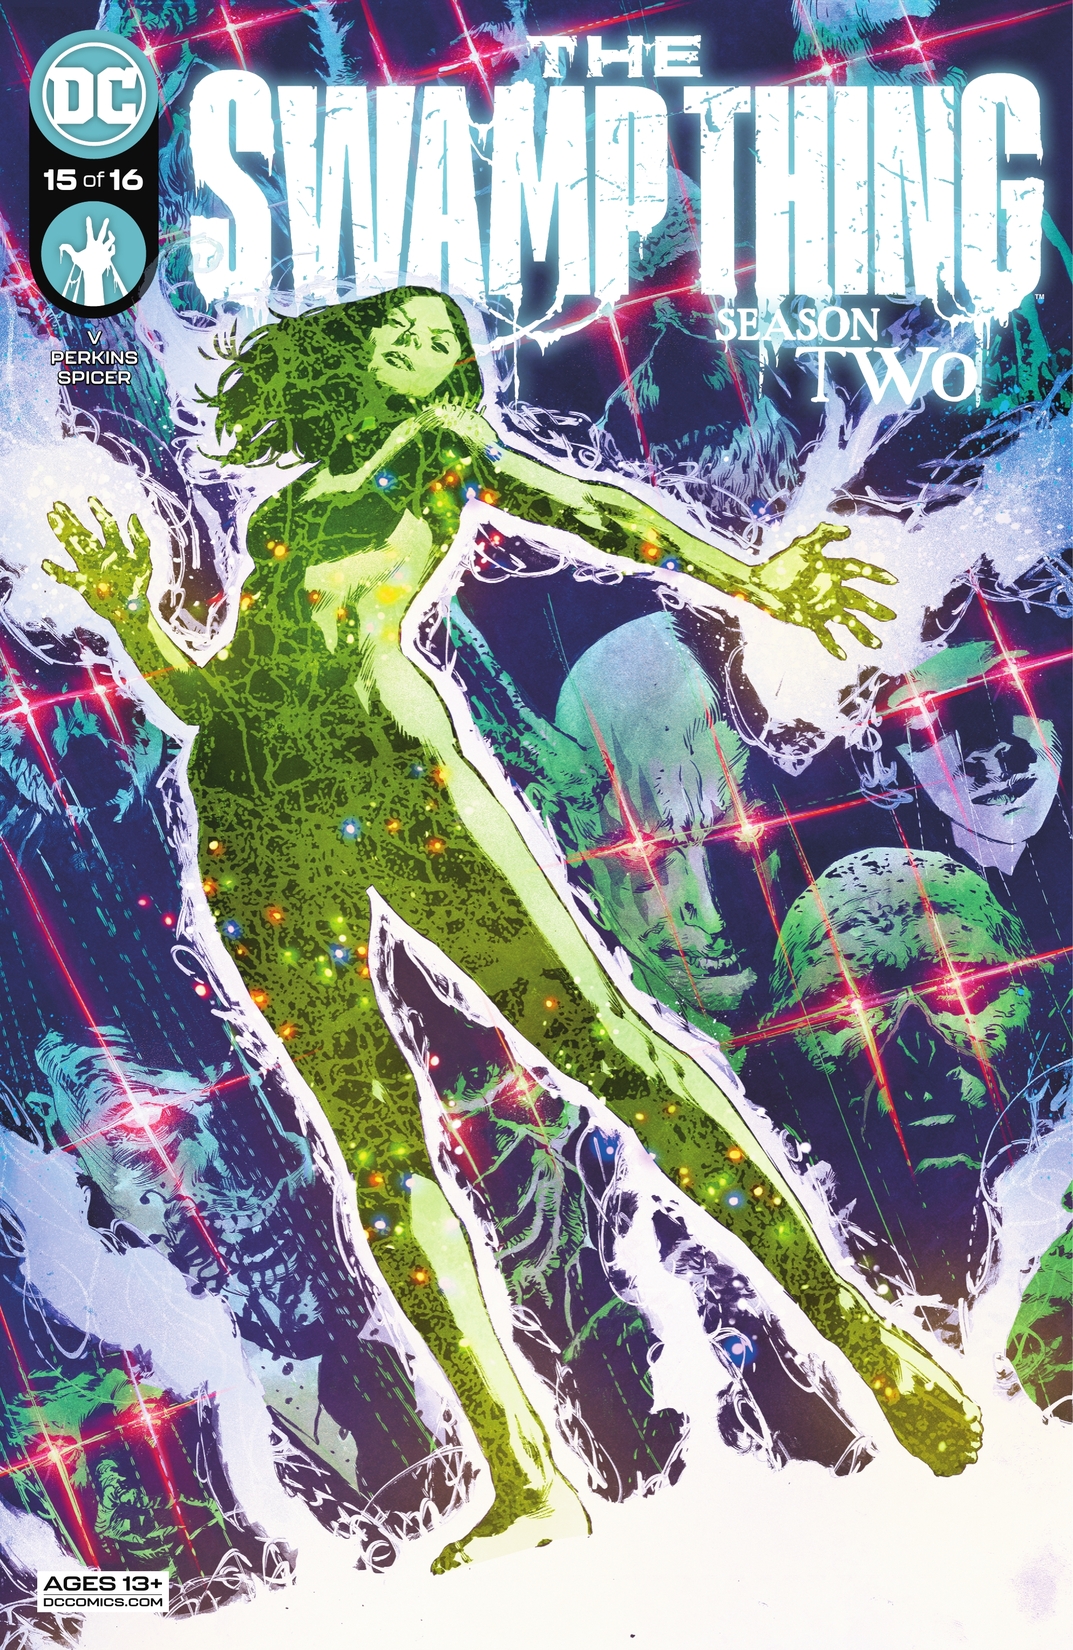 The Swamp Thing #15 preview images